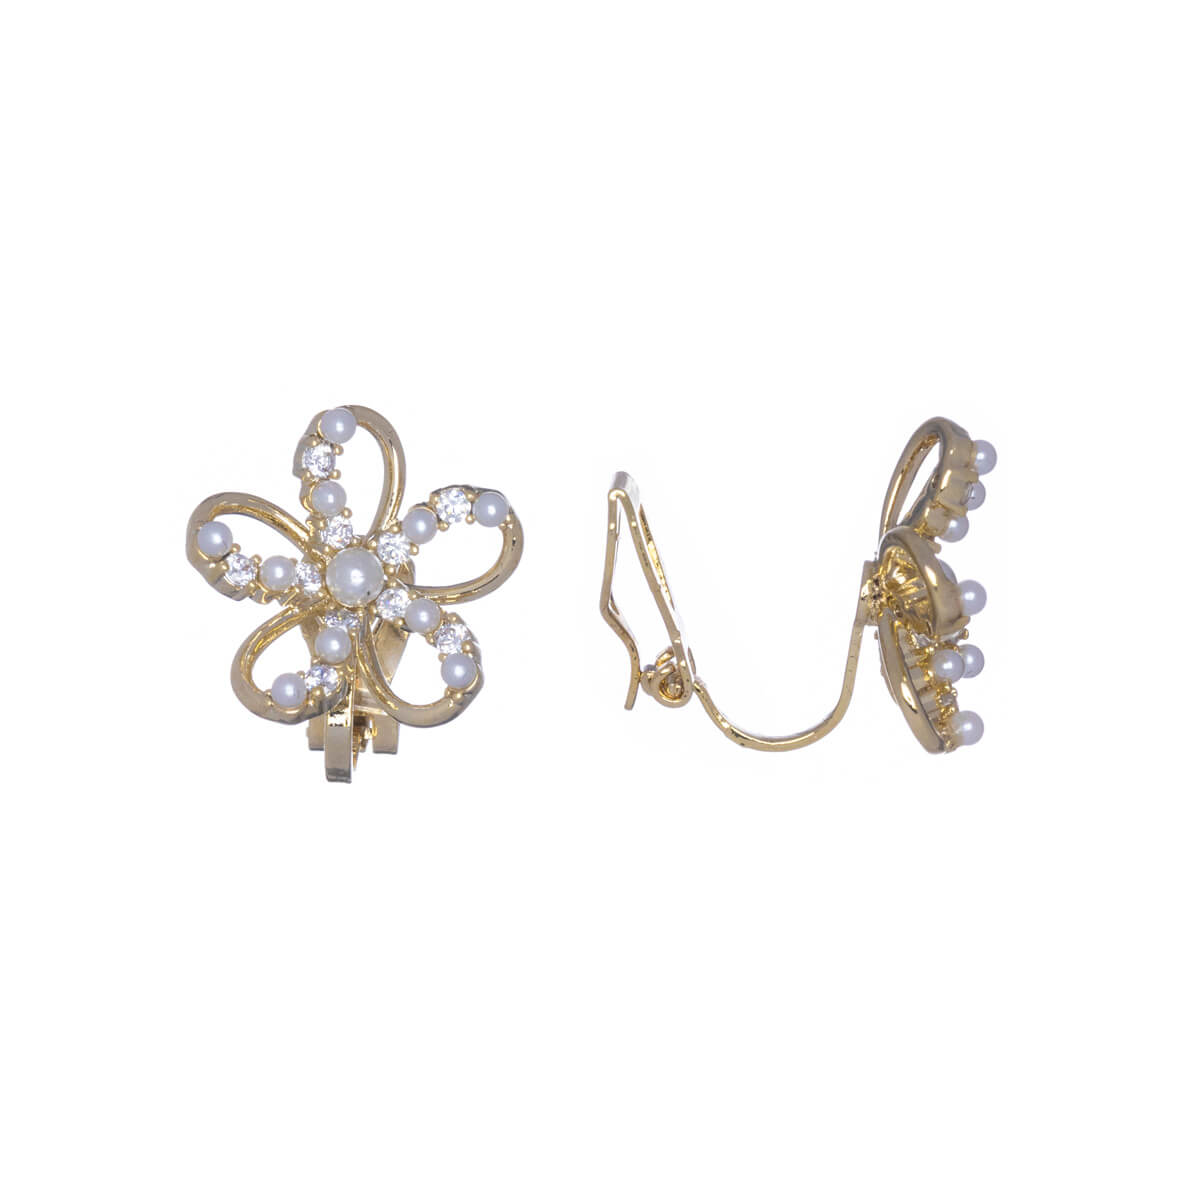 Pearl flower clip-on earrings with zirconia stones